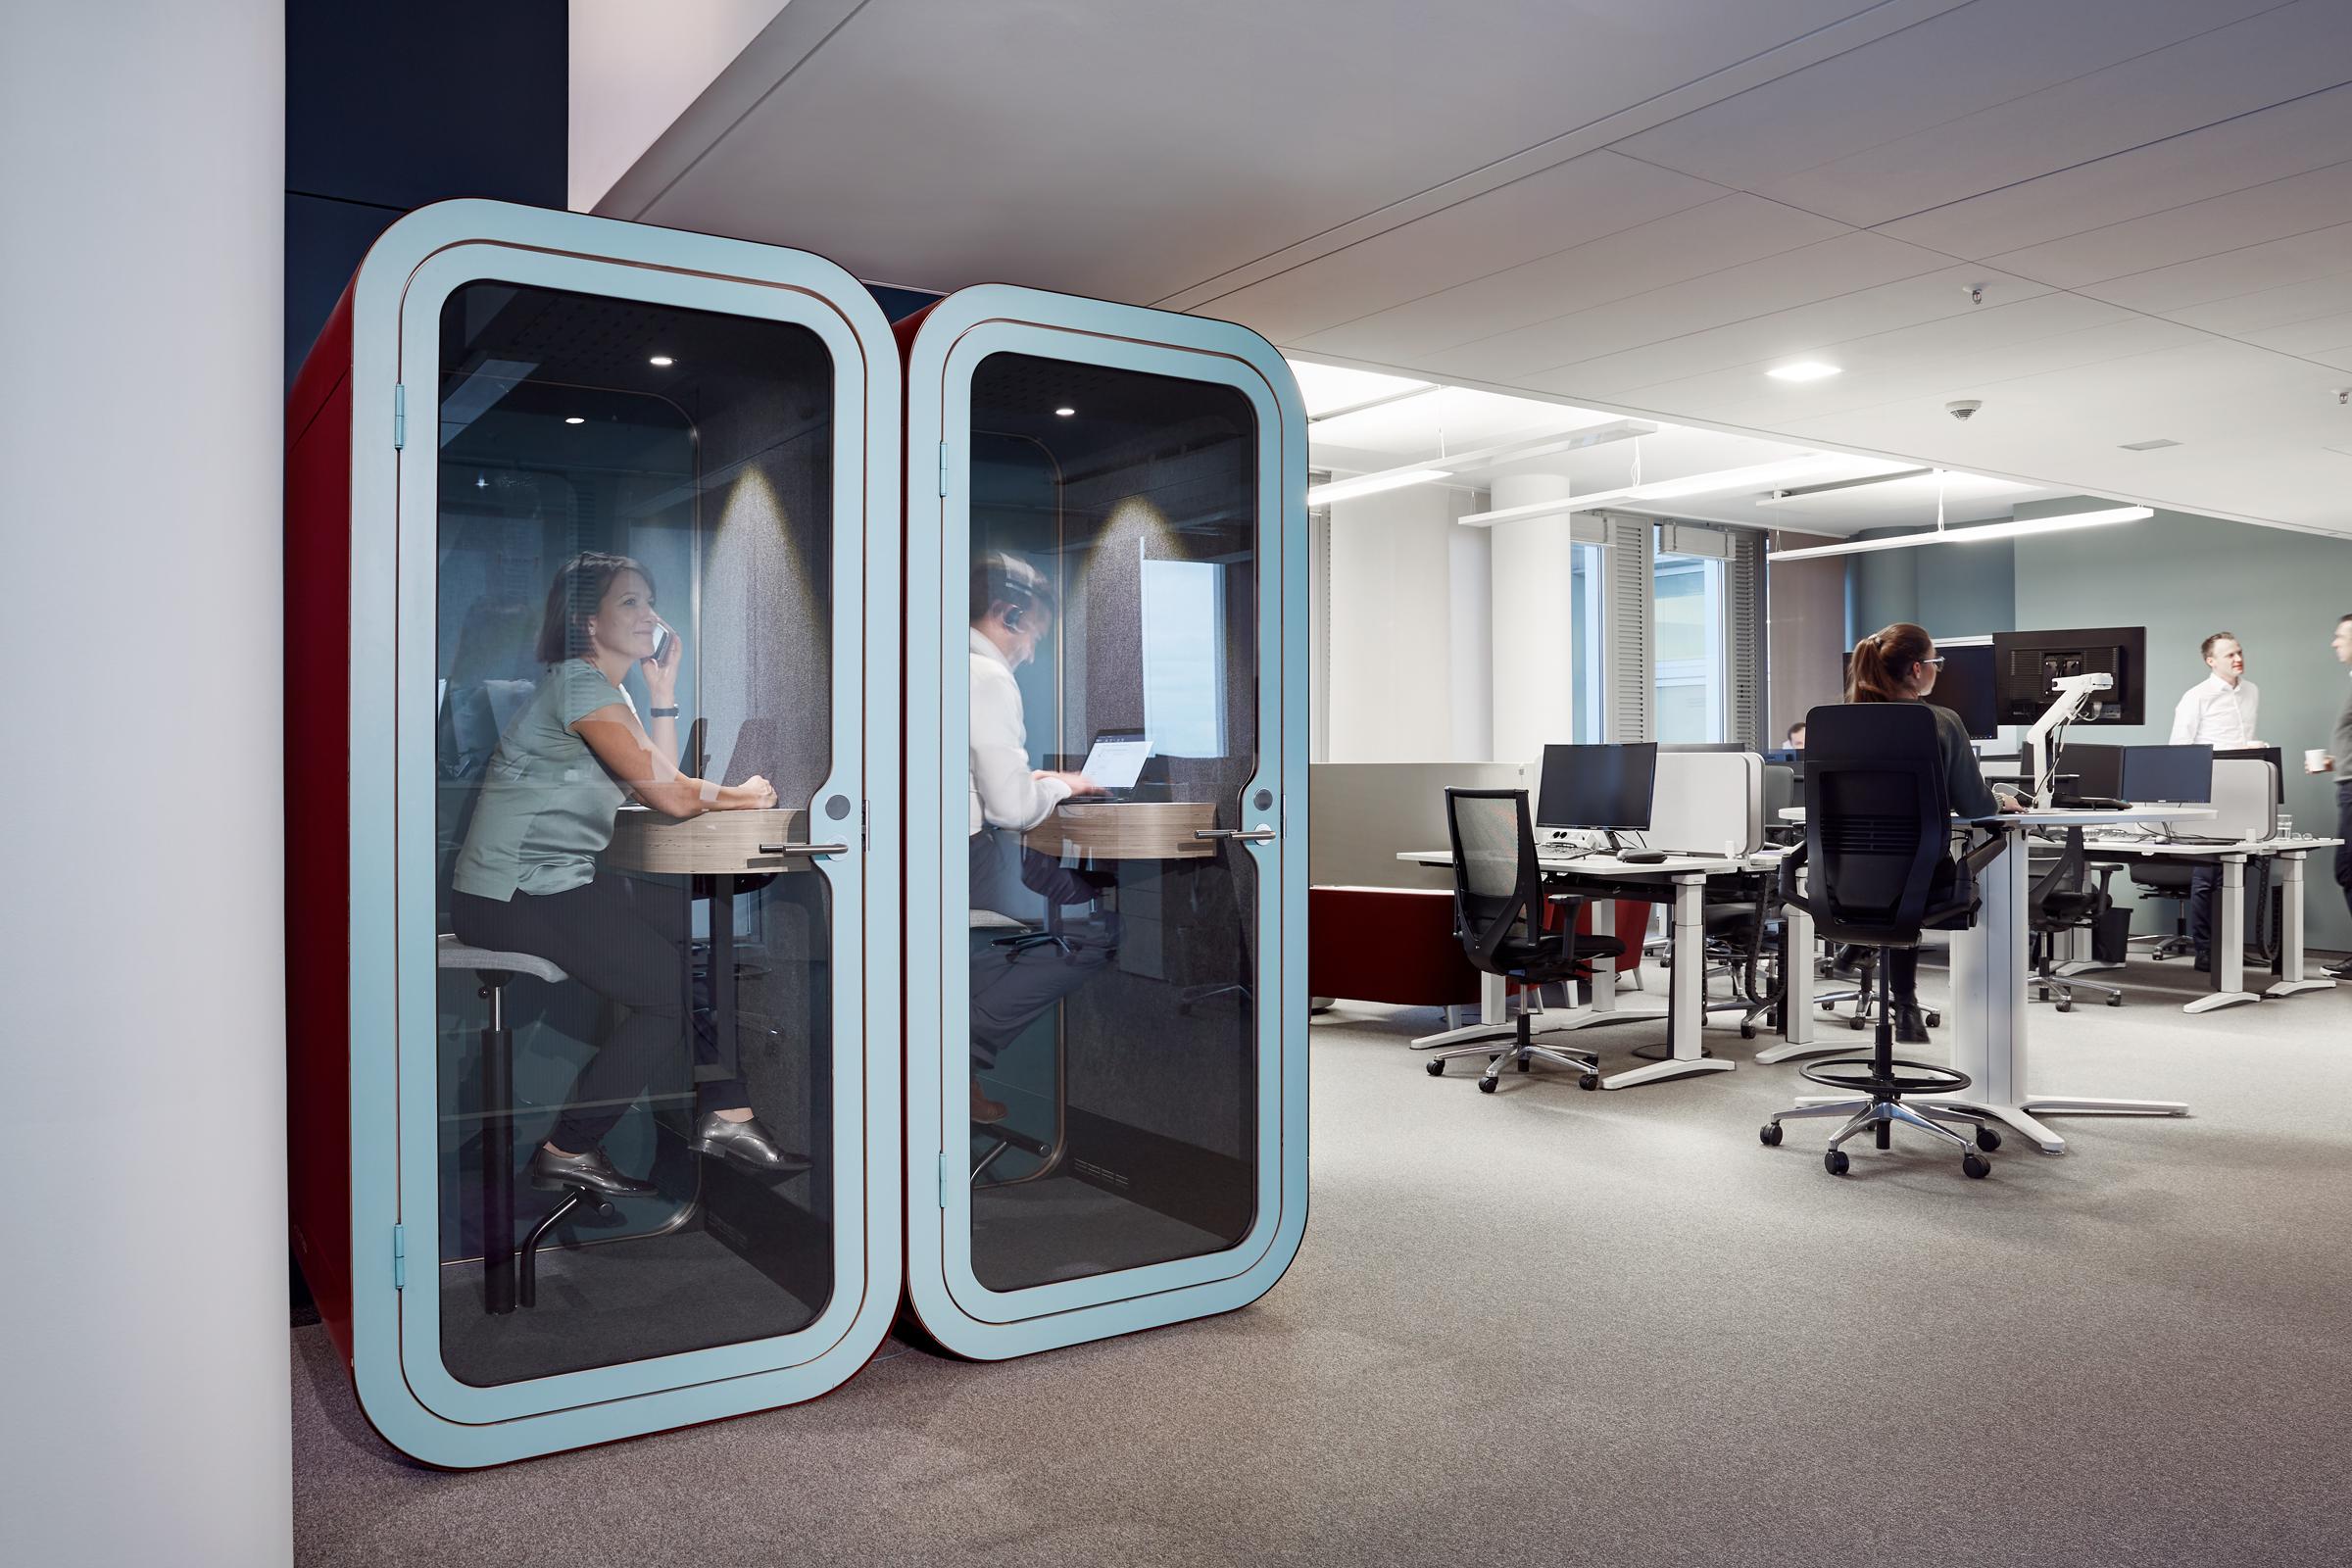 Framery O is a good fit for a video conferencing pod